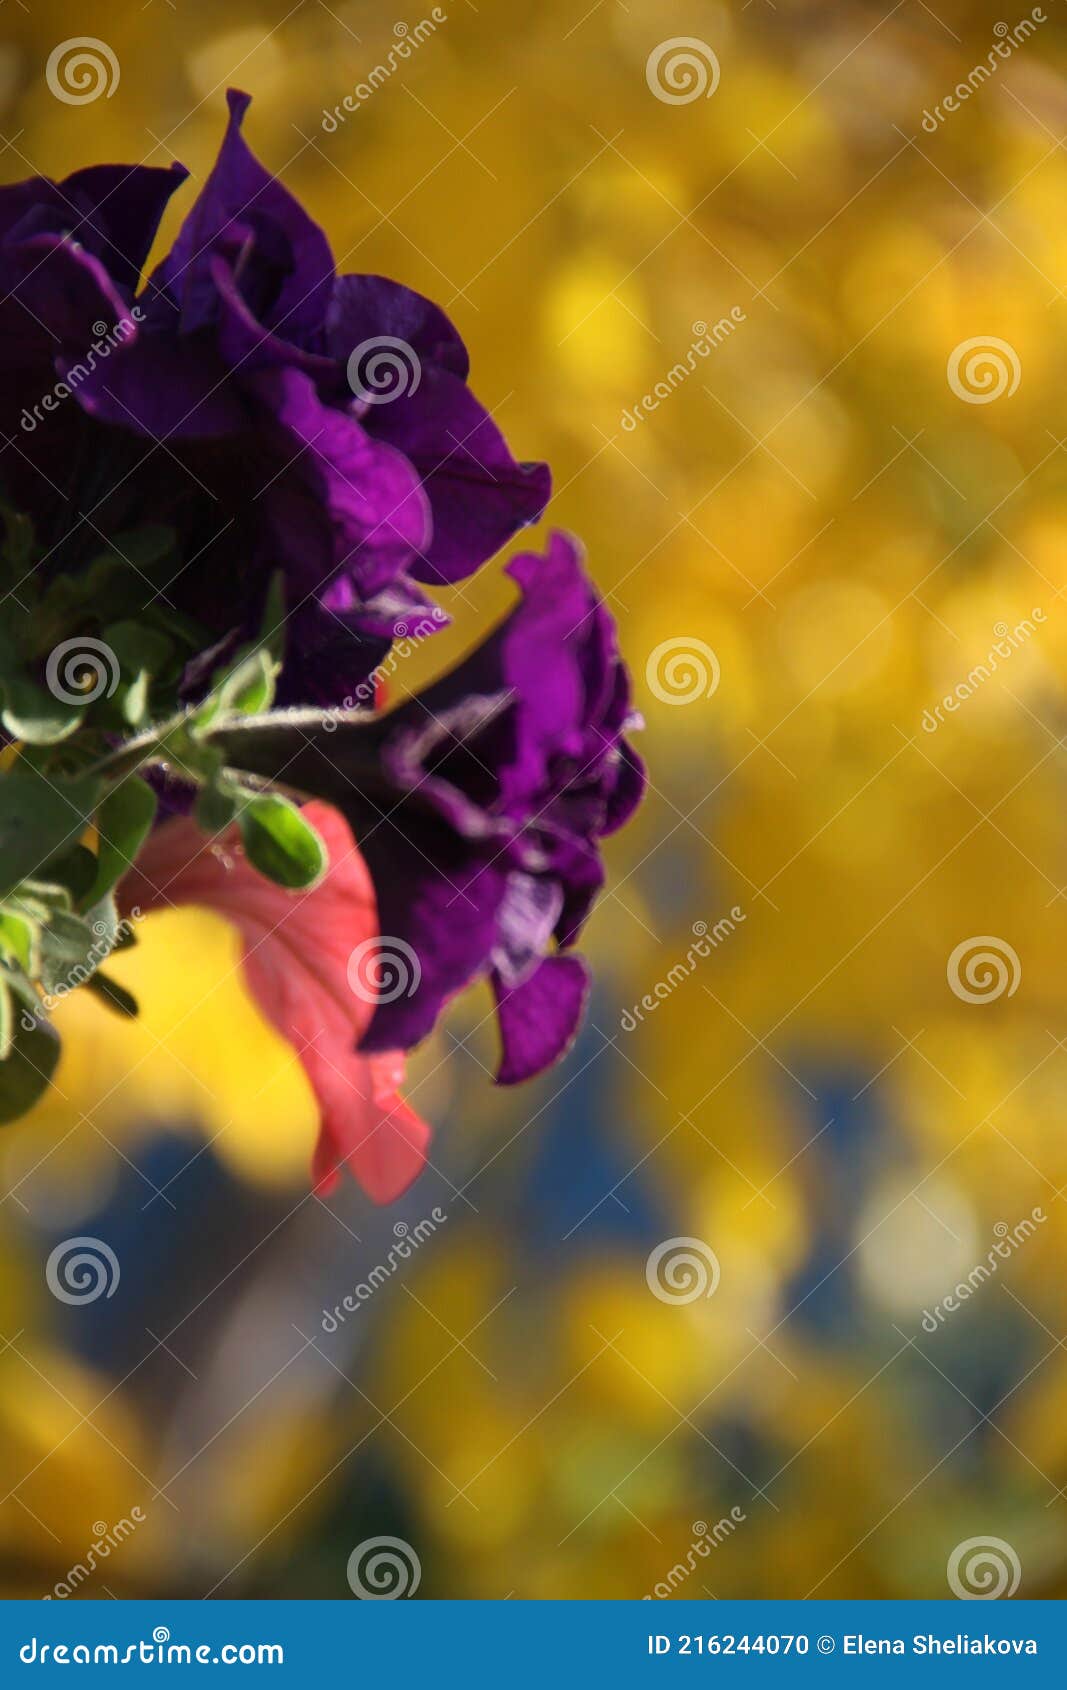 violet flower texture on yellow